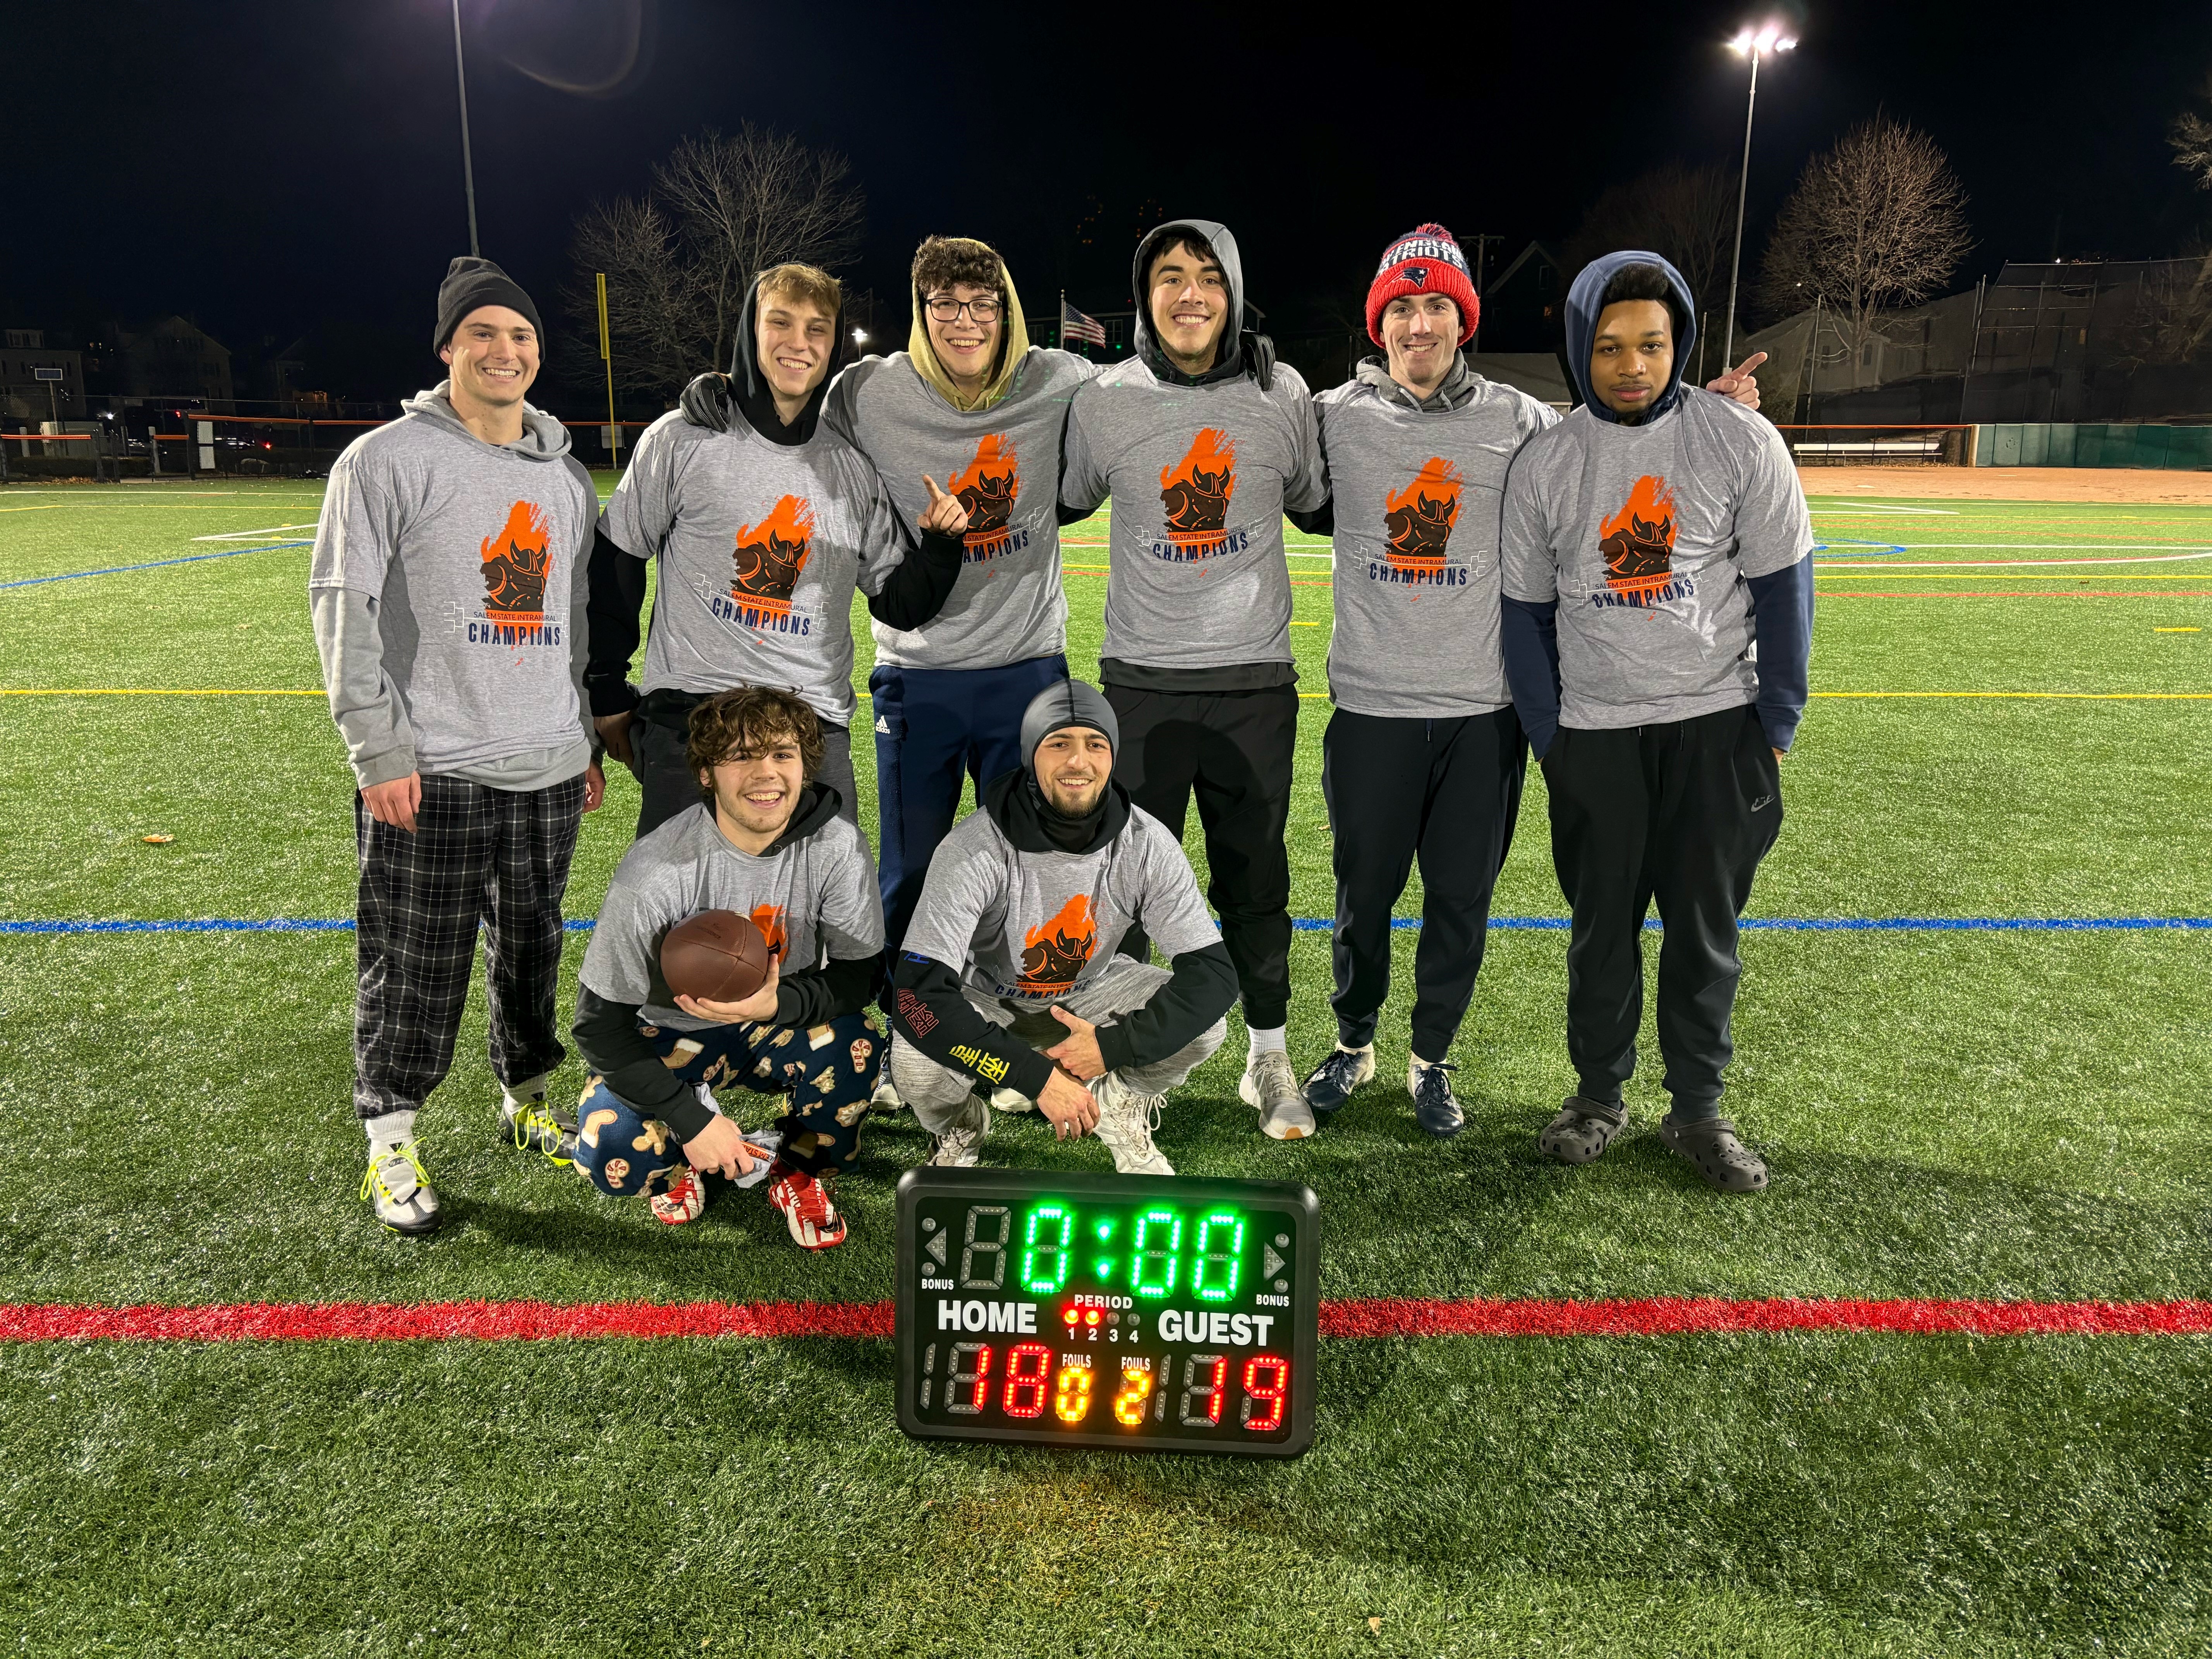 Intramural champions receive a shirt, bragging right, and are featured on marke…